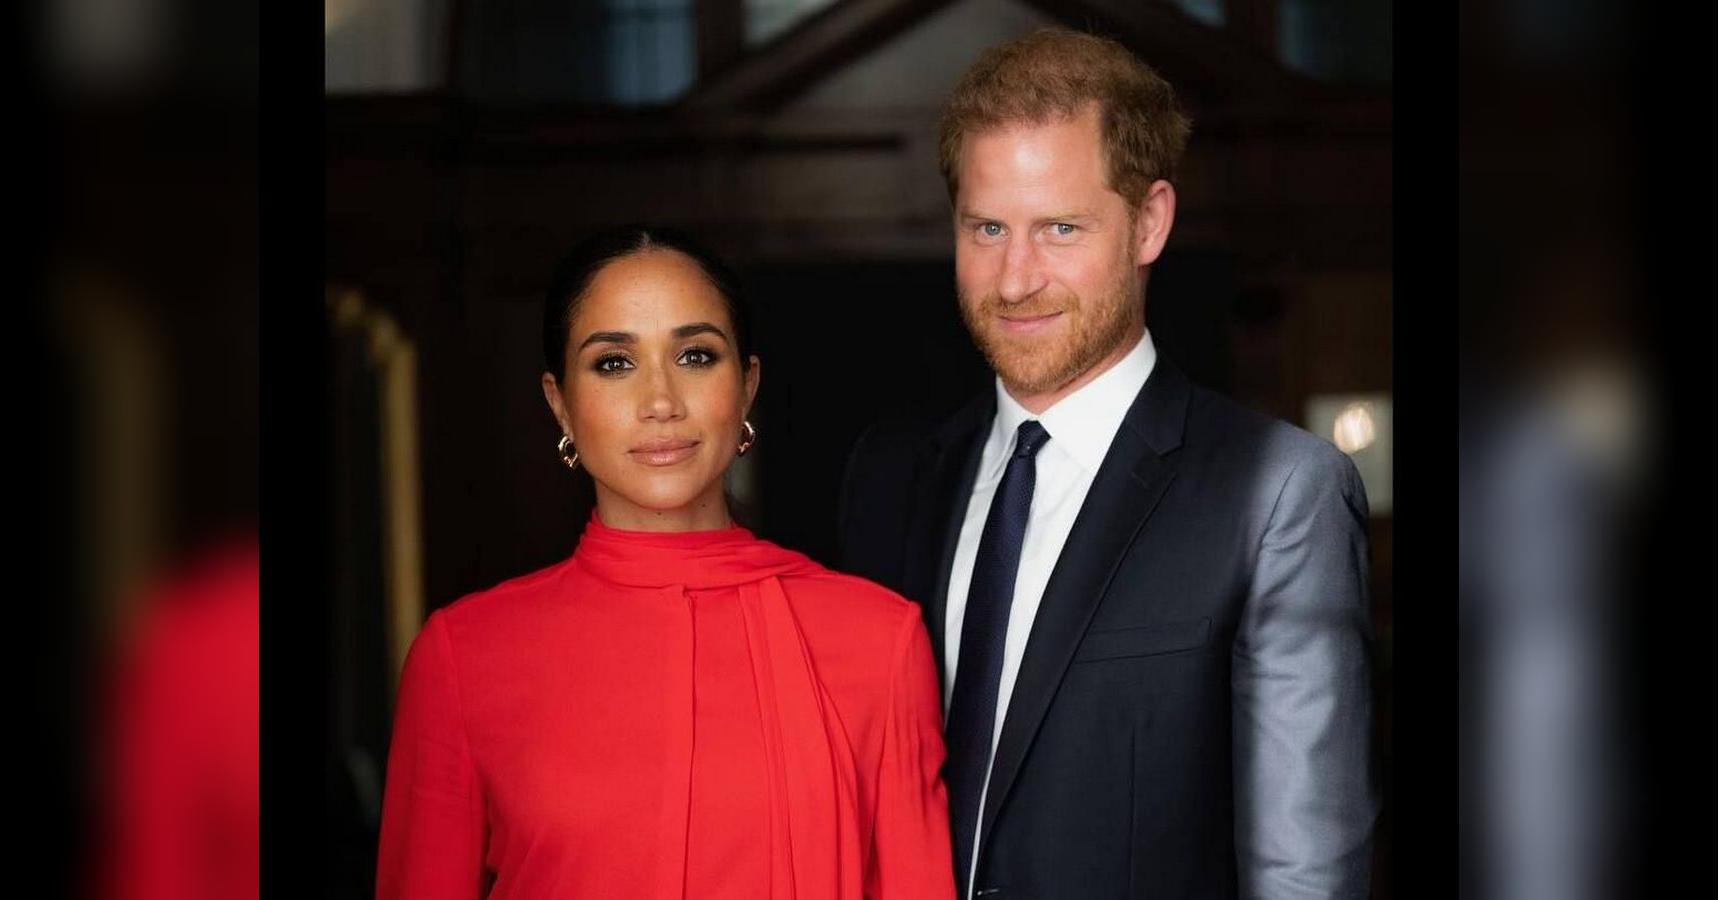 Prince Harry and Meghan Markle need to win back the favor of the British